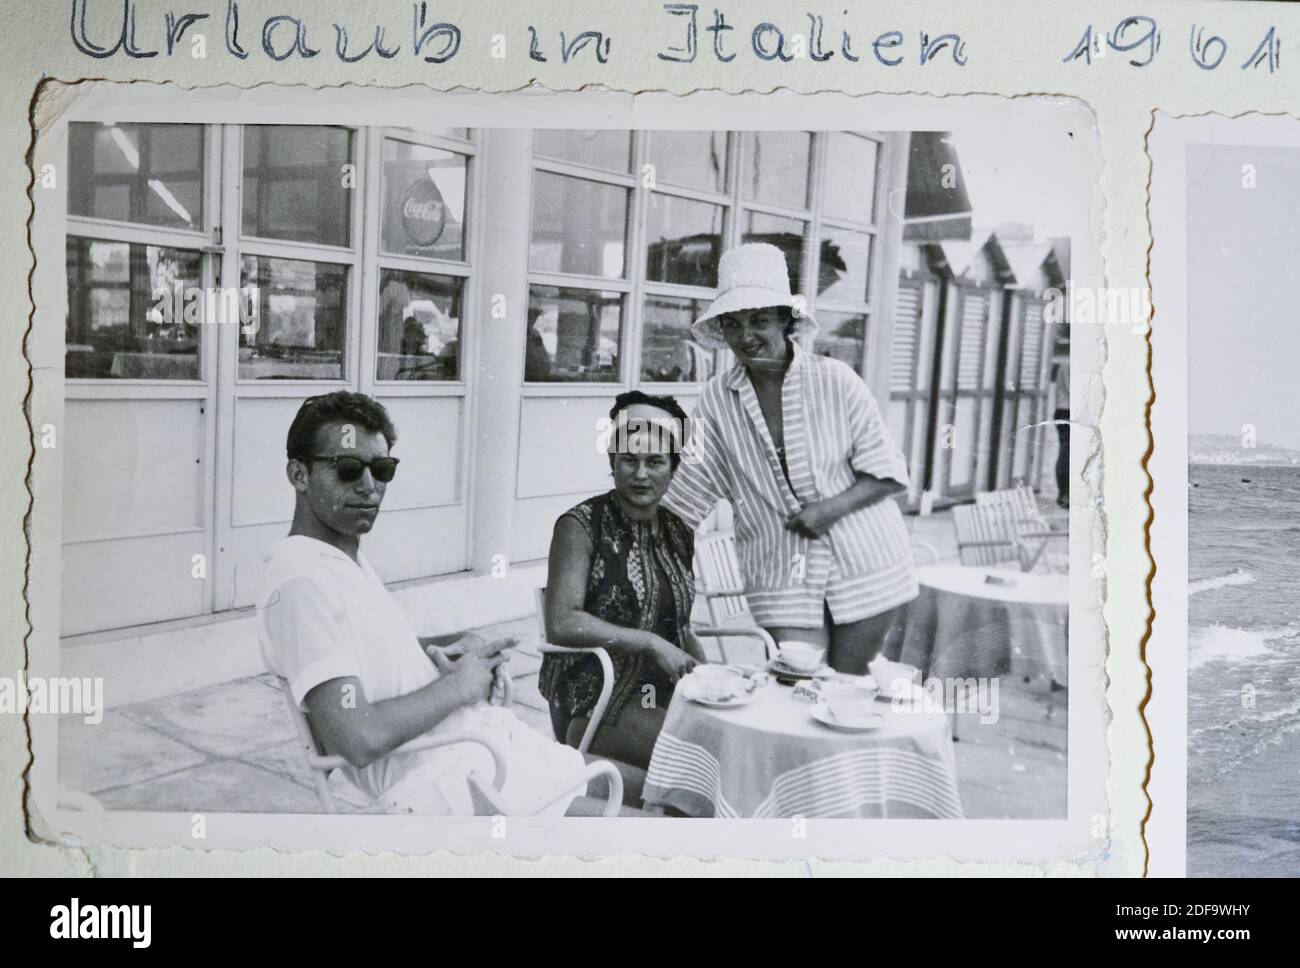 Historical Photo:  Couple and woman in beach vacation in Italy 1961 in Gatteo a Mare, Mediterranean Sea, Italy. Reproduction in Marktoberdorf, Germany, October 26, 2020.  © Peter Schatz / Alamy Stock Photos Stock Photo